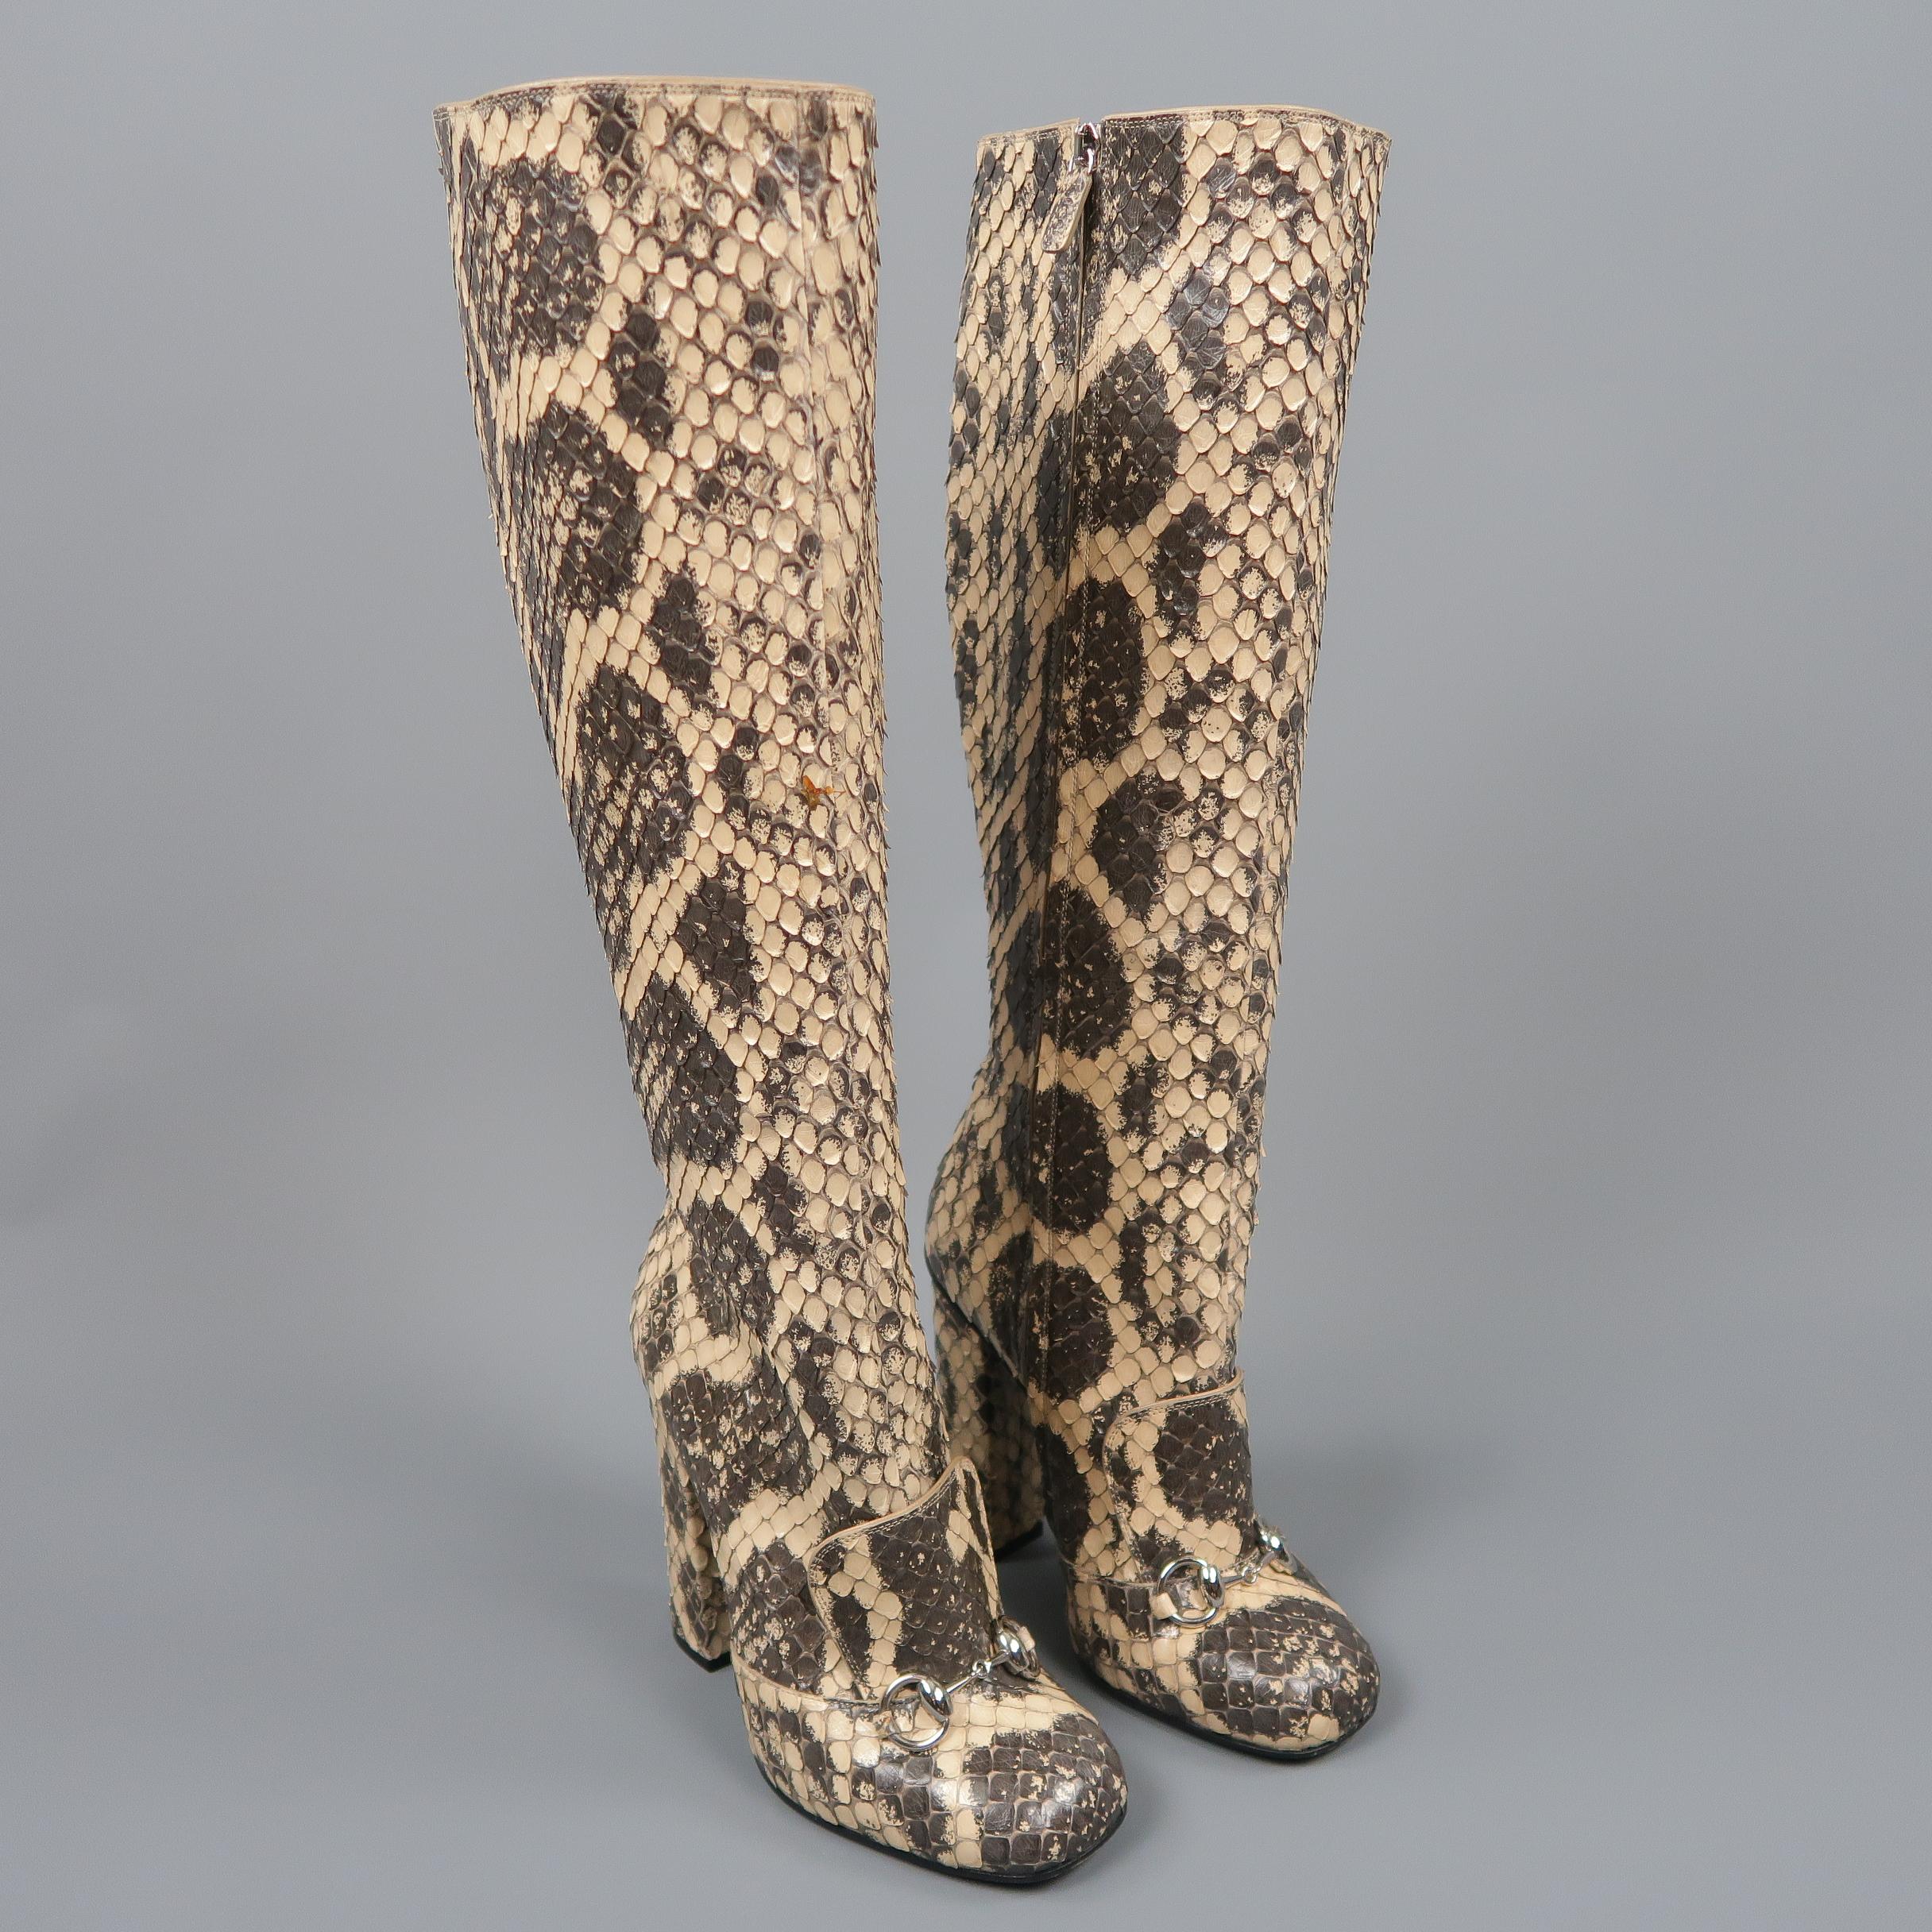 GUCCI knee high boots come in natural beige python skin leather with a rounded square toe, chunky covered heel, and tongue detail with silver tone horse-bit. Spot on right boot. As-is. With box and dust bags. Made in Italy.  Retail Price $3500.00
